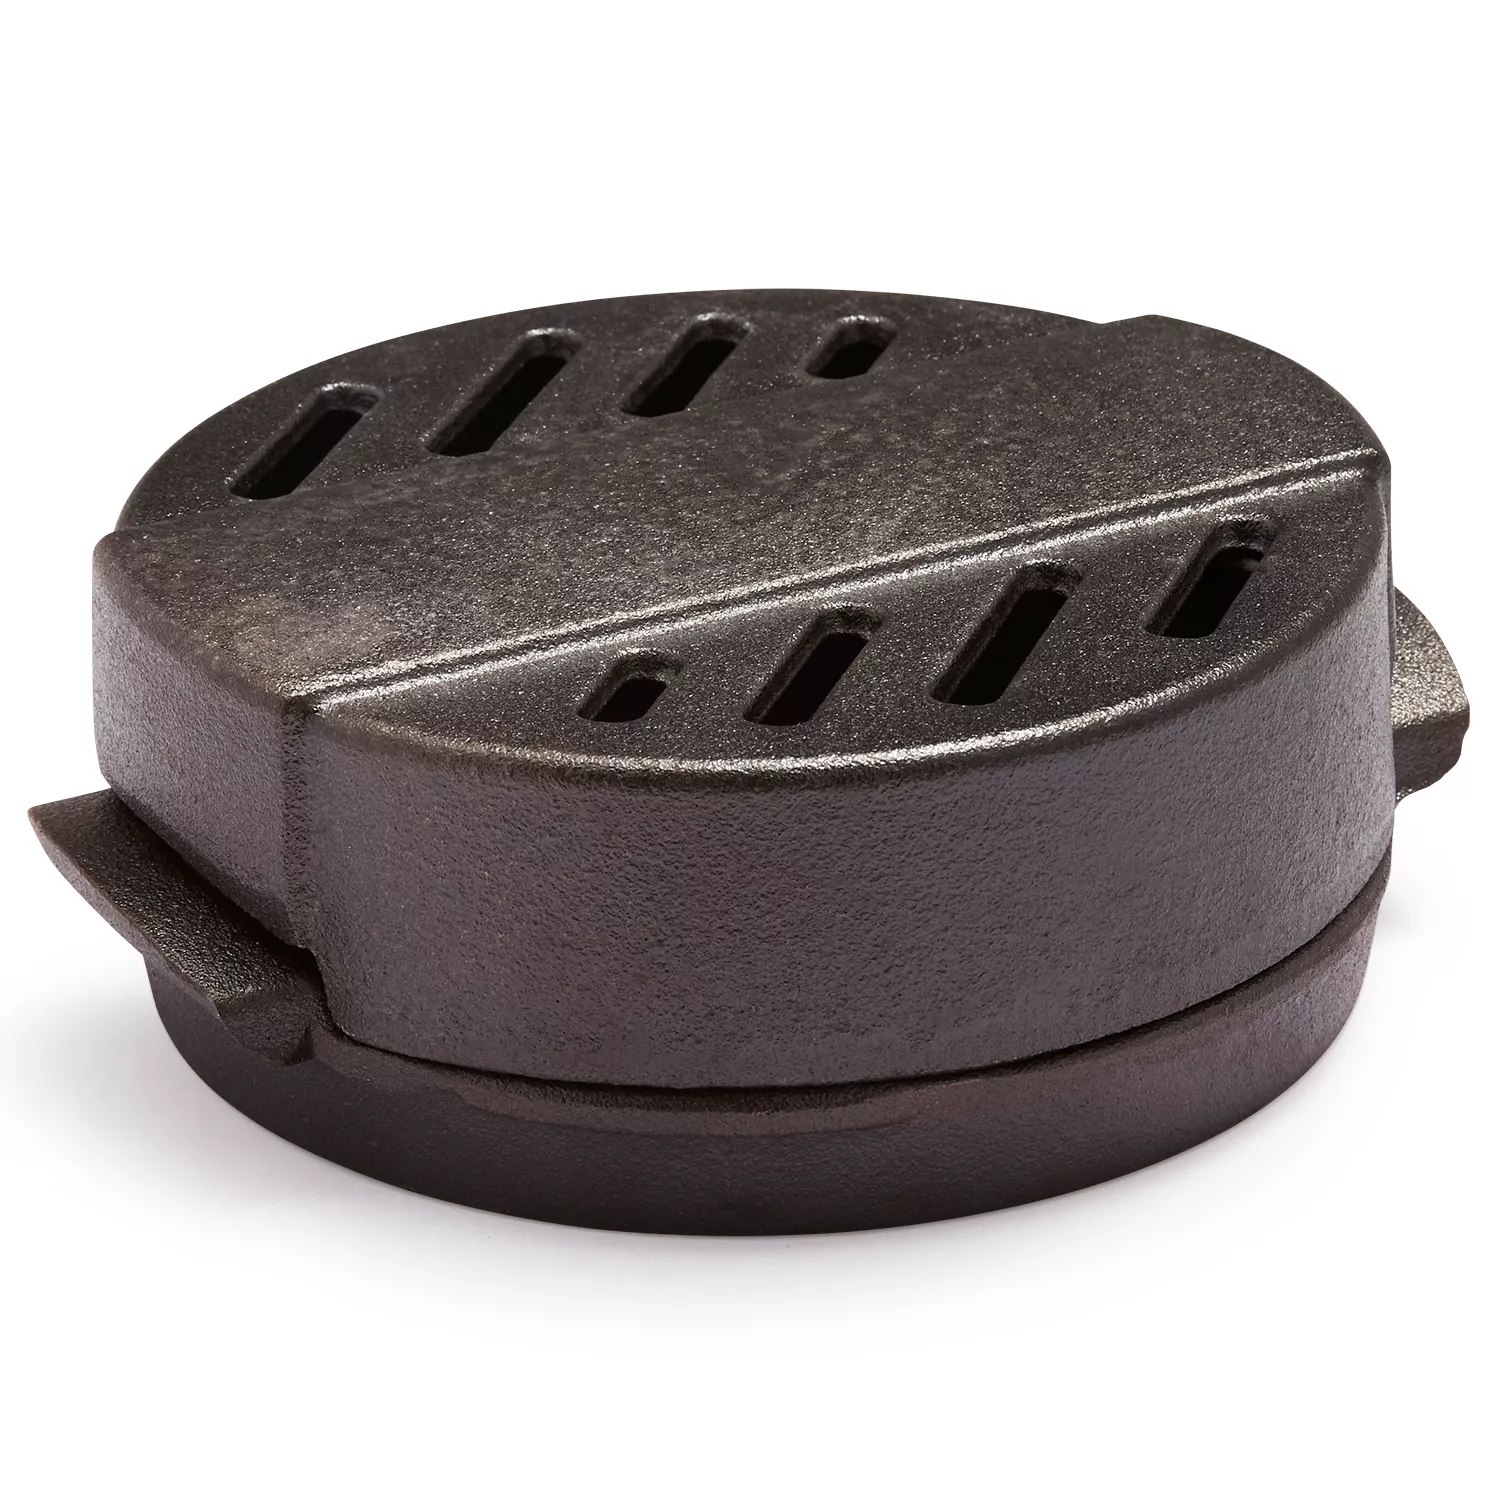 6-Inch Cast Iron Brie Baker